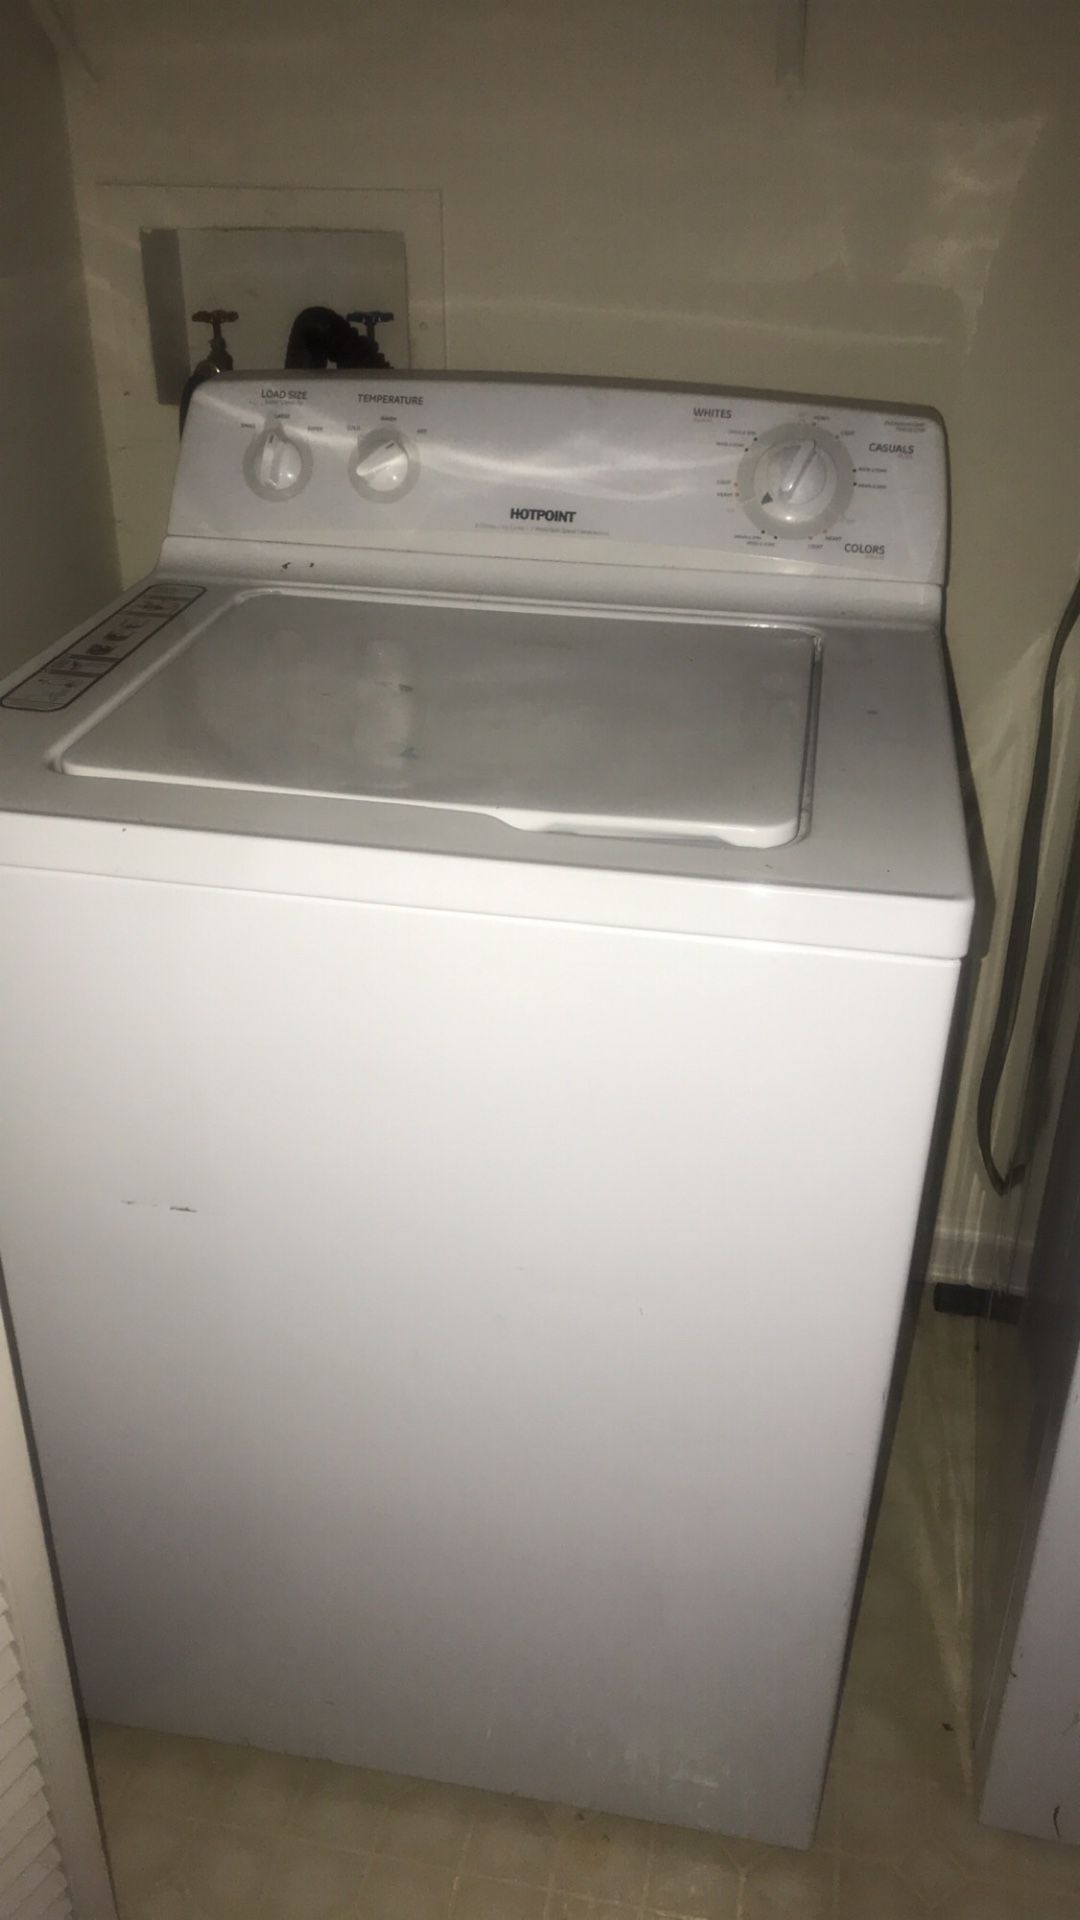 Hotpoint was her and dryer set